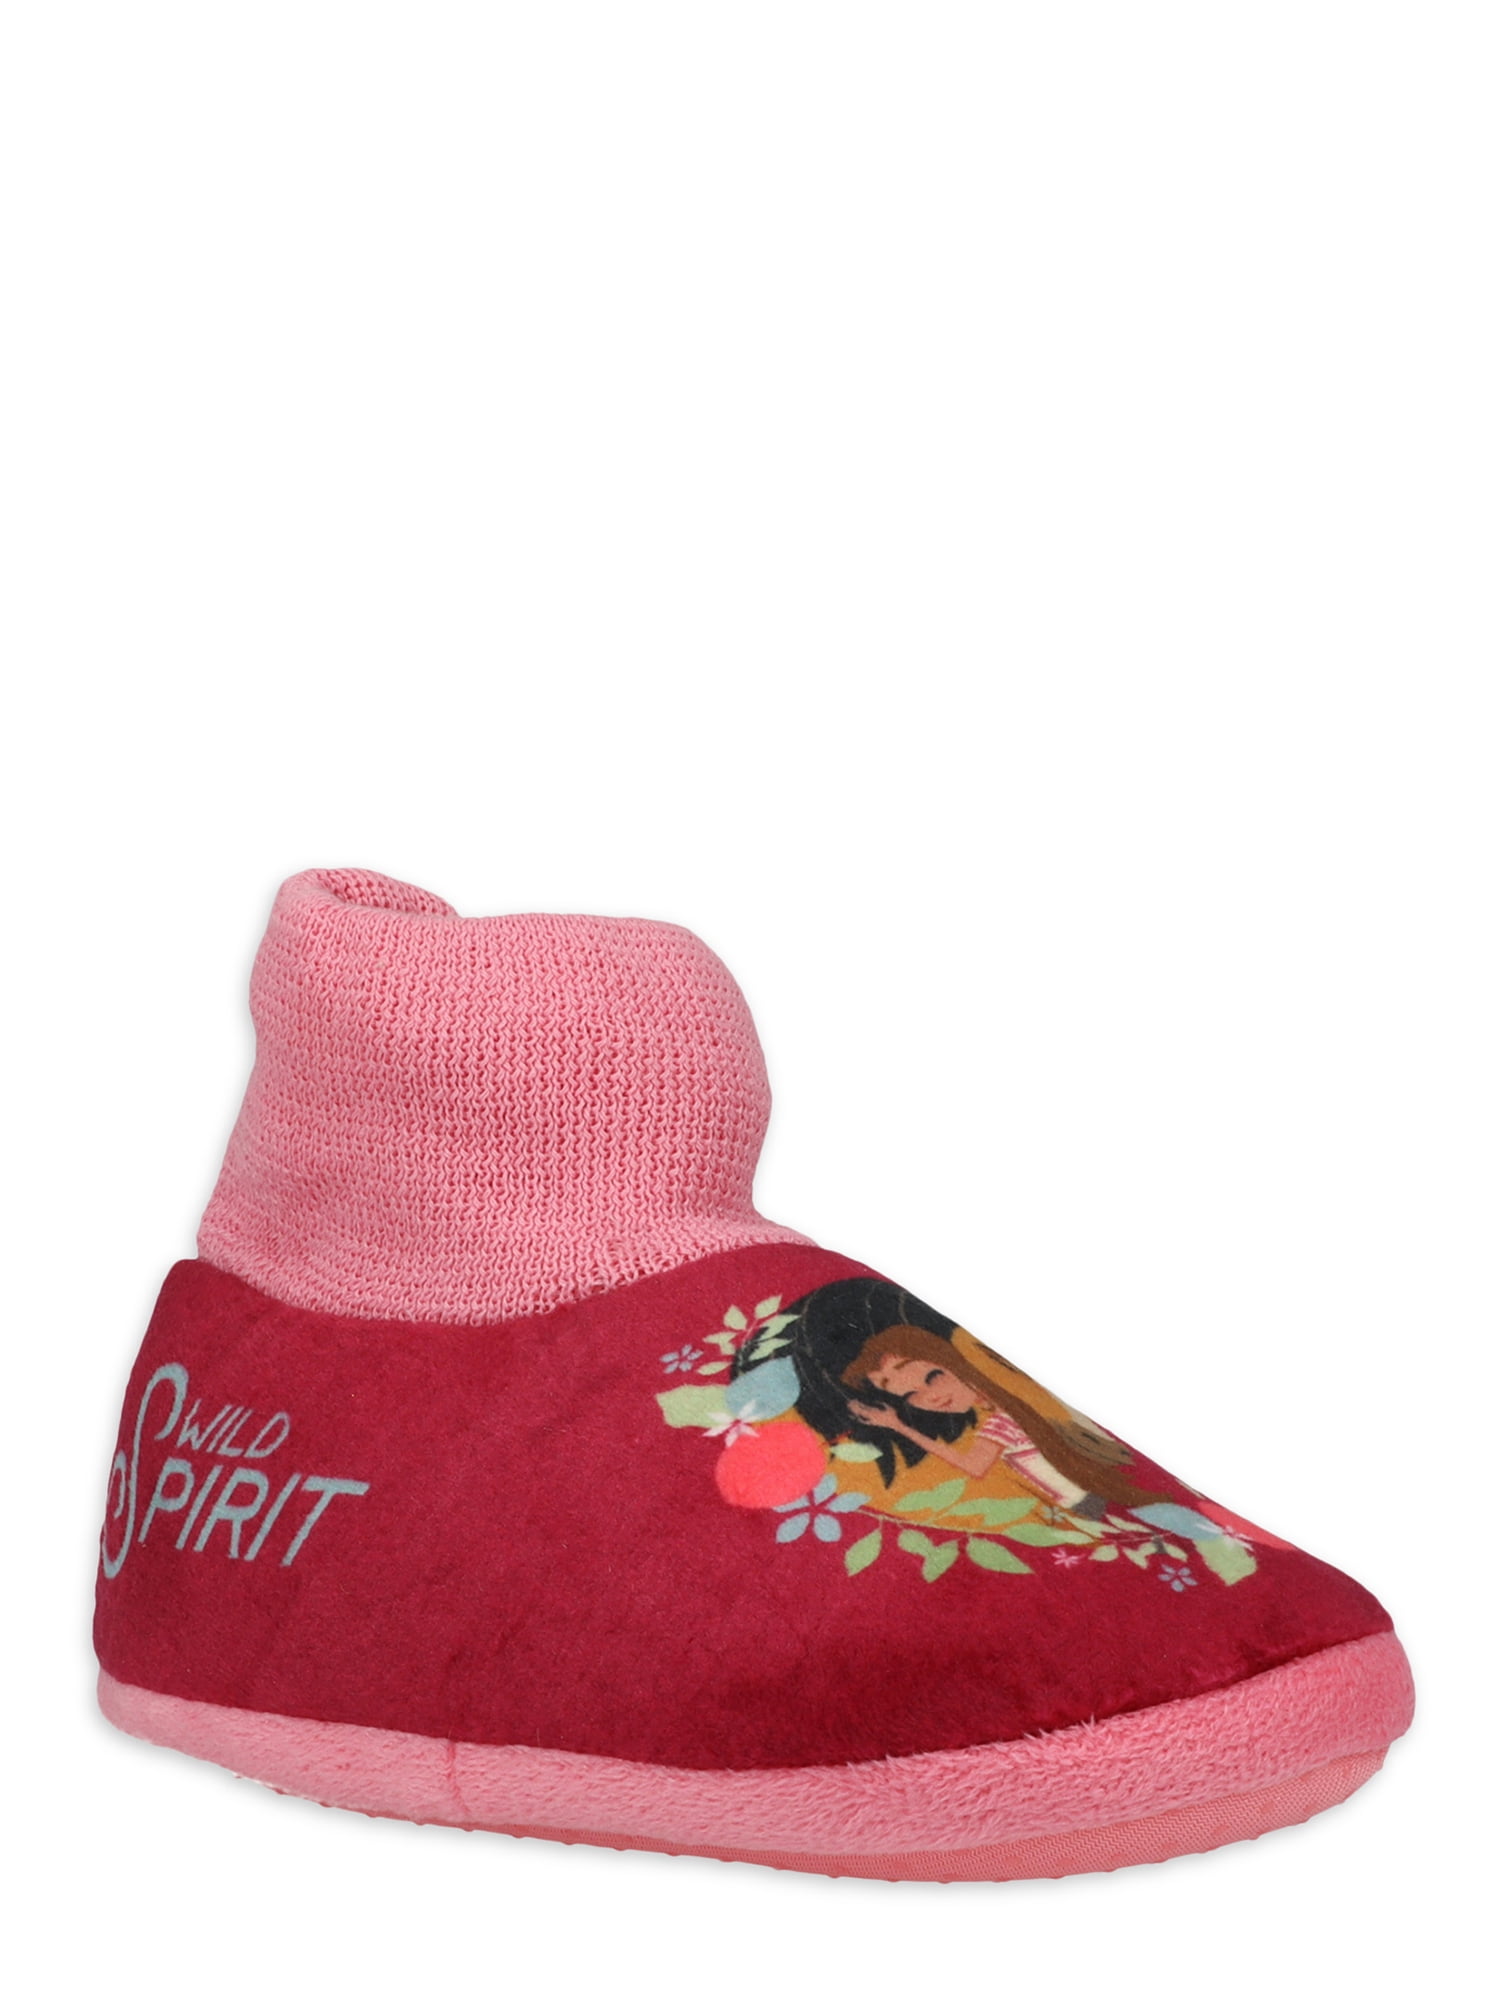 Soft Slippers Snuggle Socks Size 9-10  New FREE P&P Girl's Pink LOL Surprise 